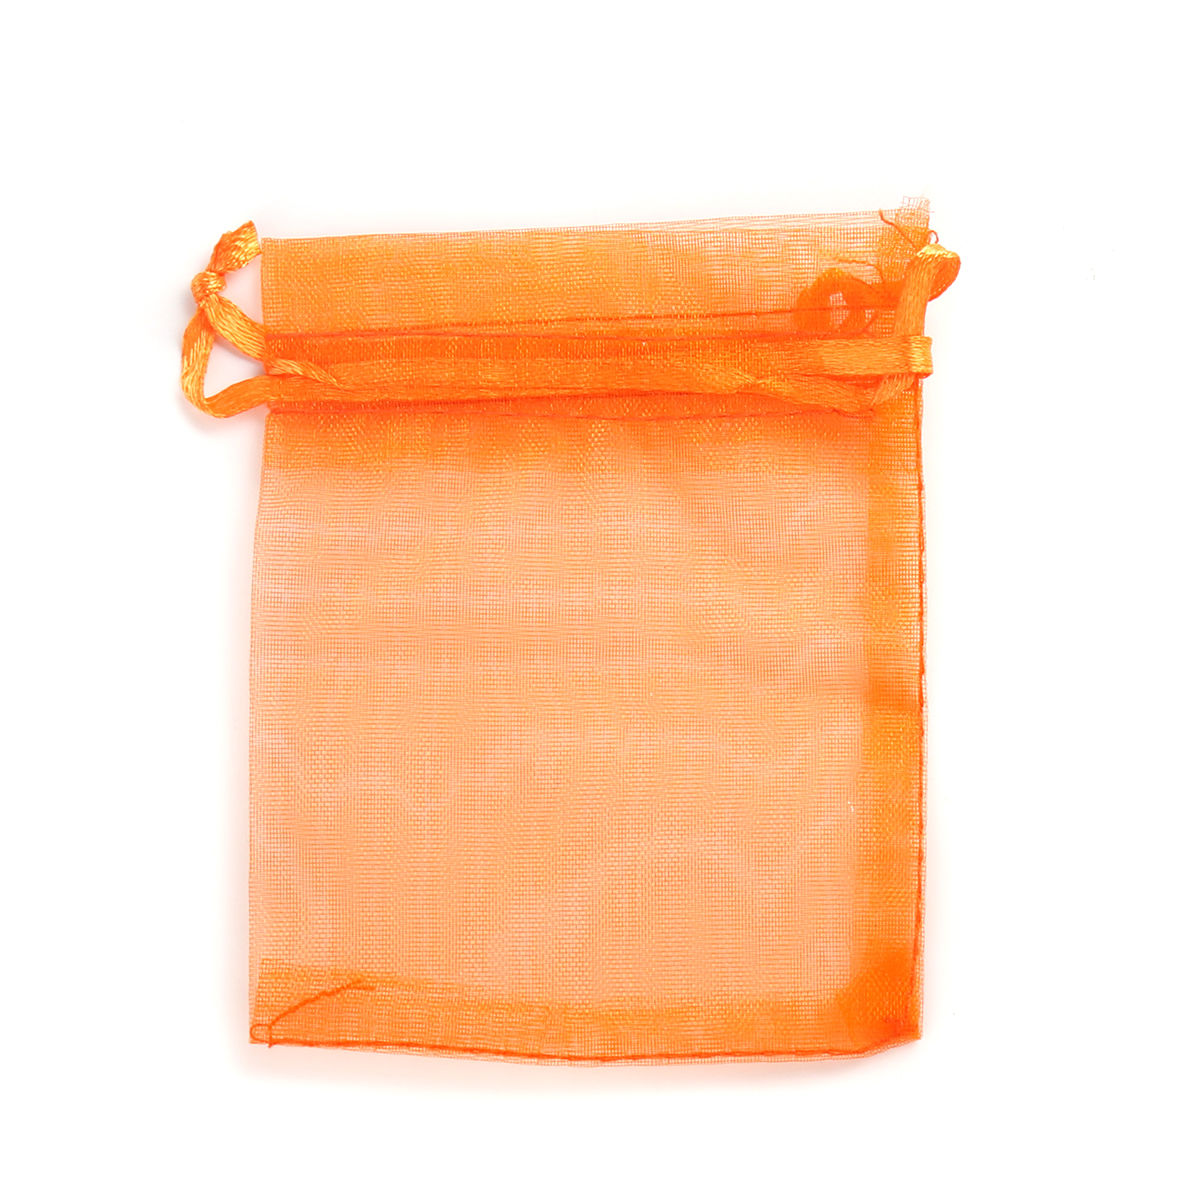 Picture of Wedding Gift Organza Jewelry Bags Drawstring Rectangle Orange 10cm x8cm(3 7/8" x3 1/8"), (Usable Space: 8x8cm) 30 PCs